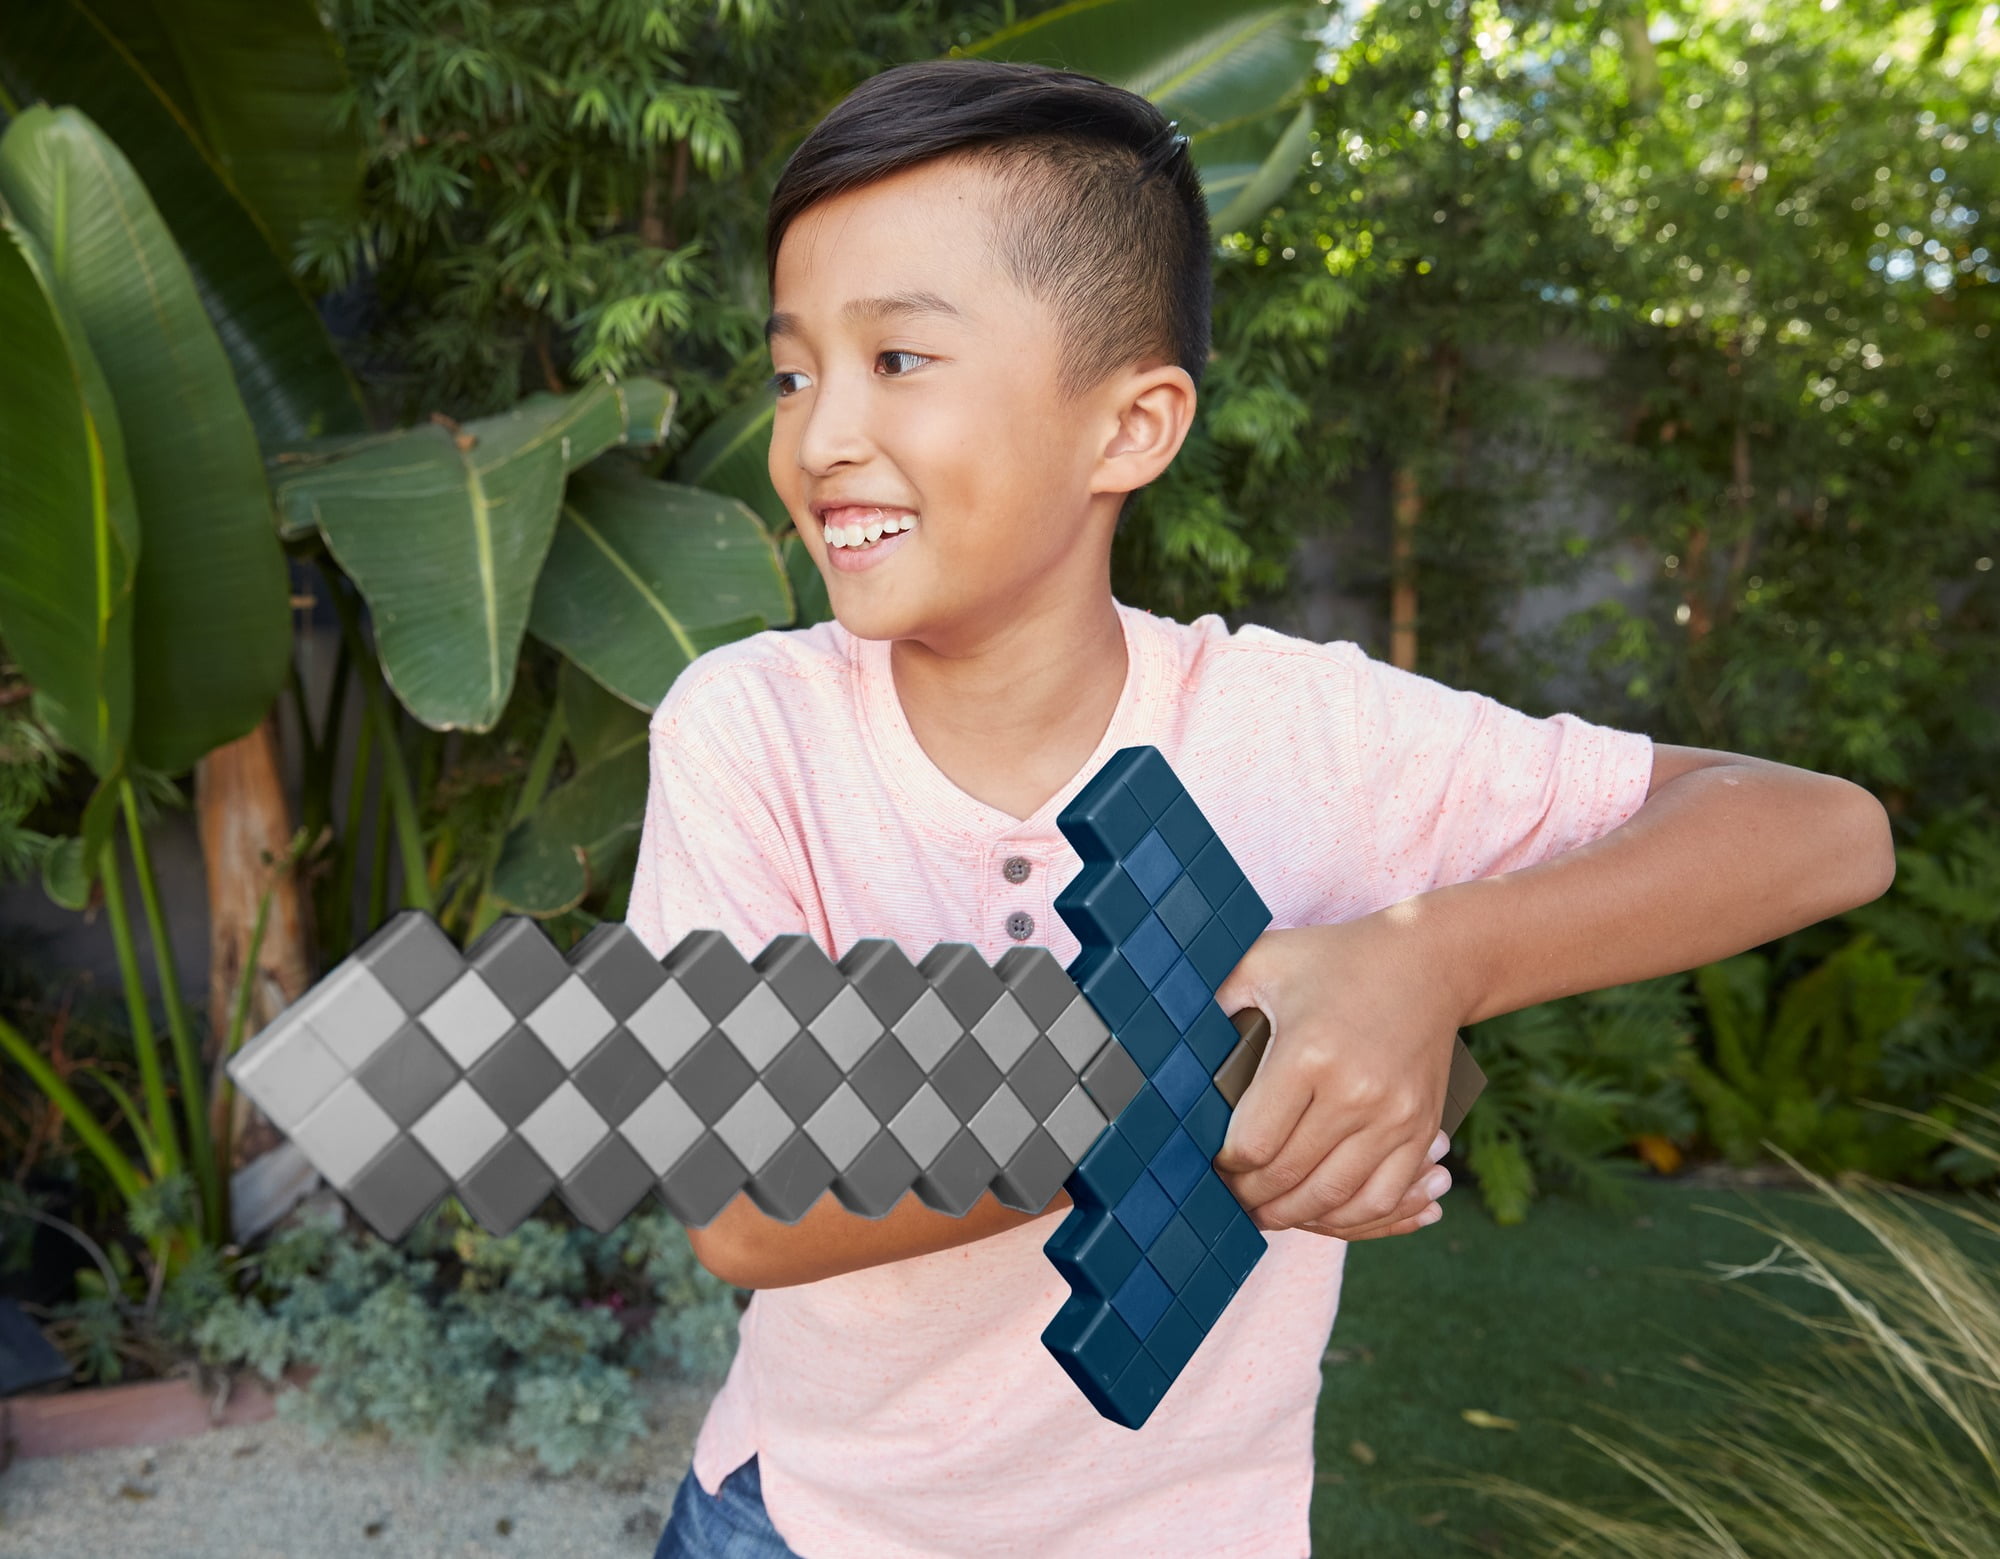 Digital To Real Life: DIY Minecraft Sword — All for the Boys